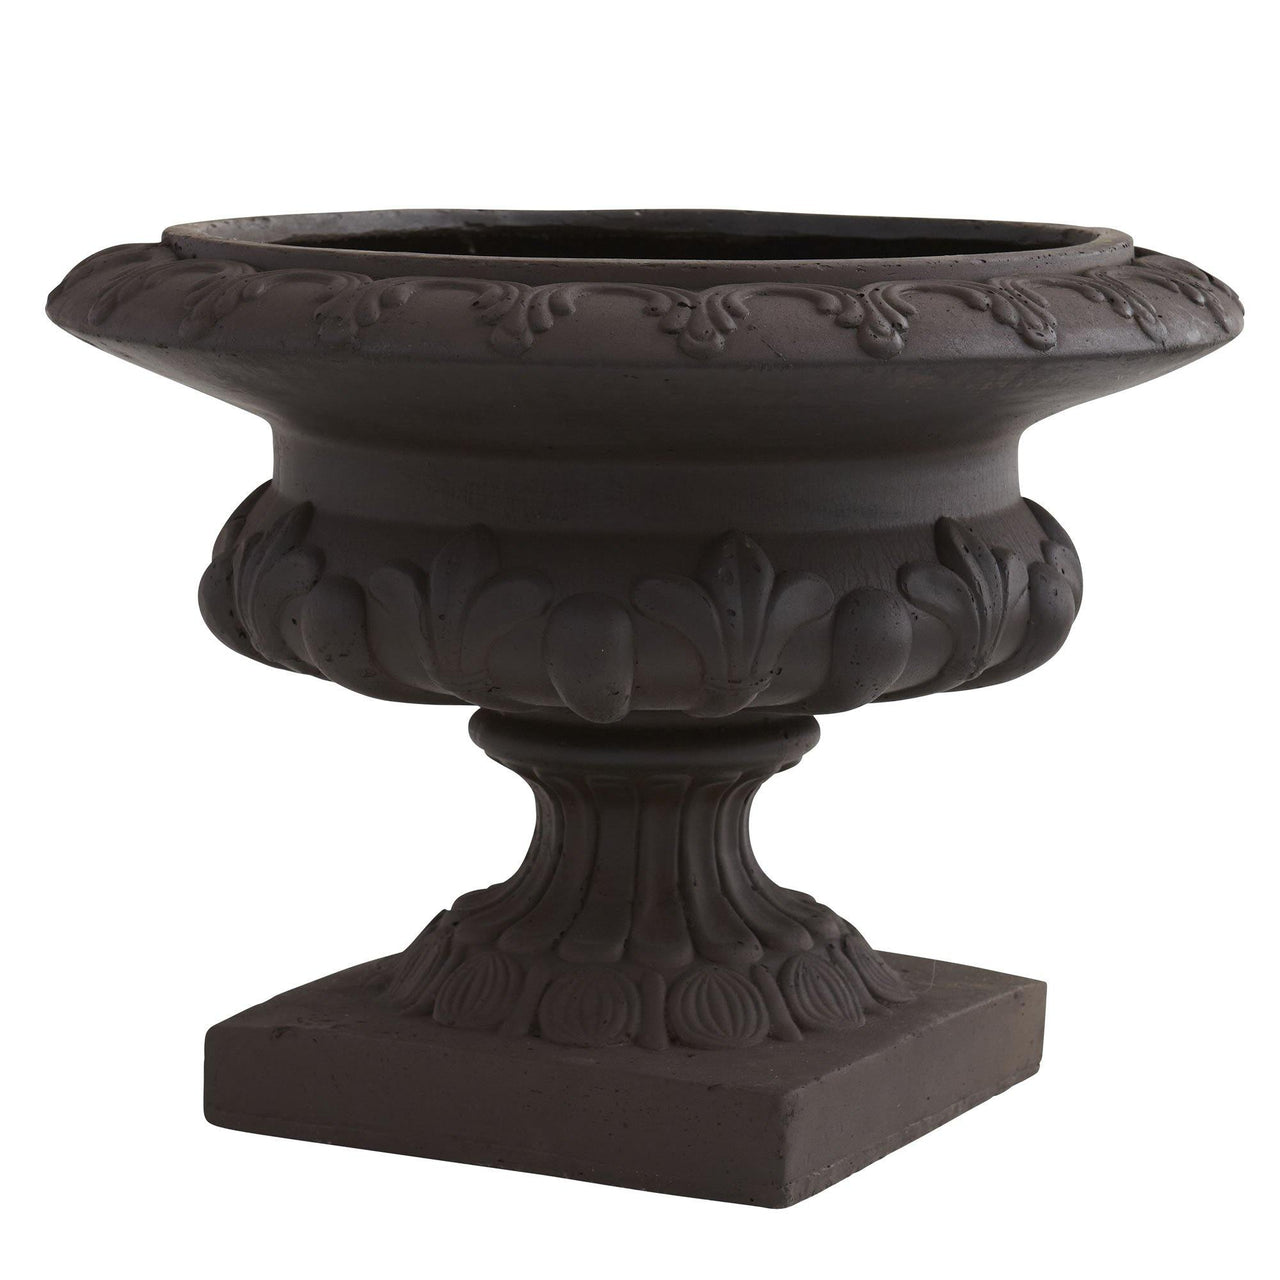 Iron Finished Decorative Urn (Indoor/Outdoor)